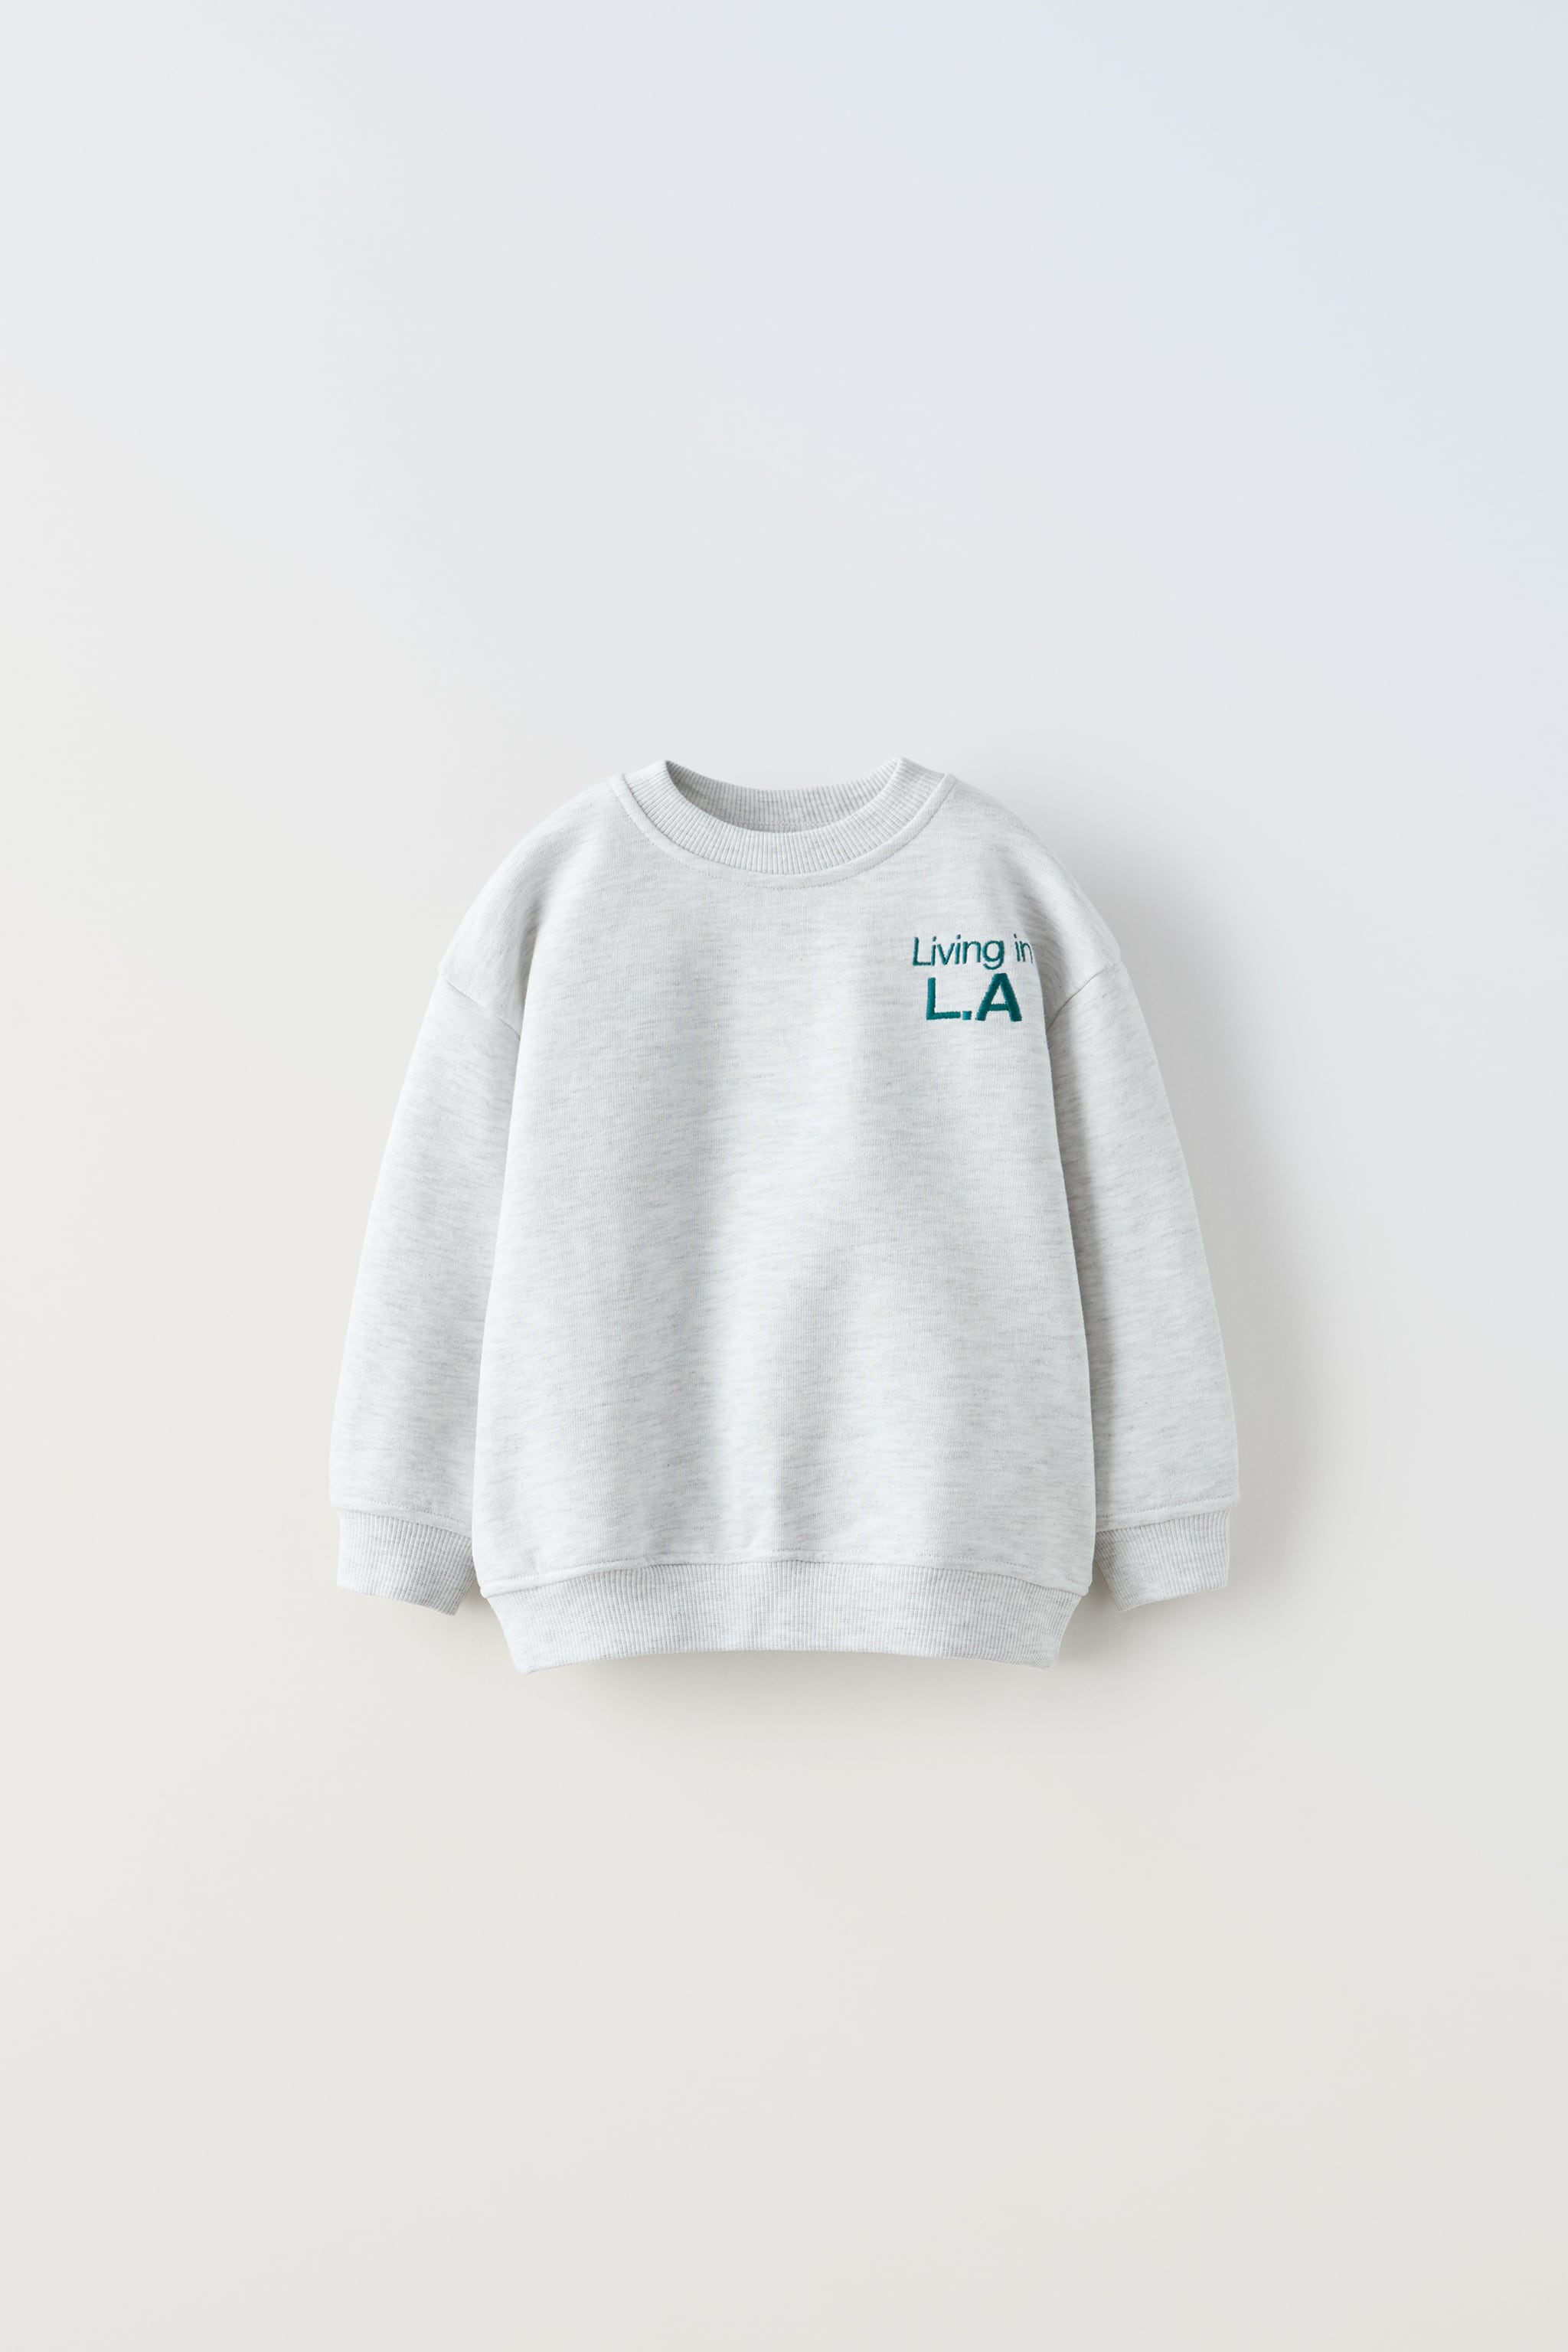 MAP OF L.A EMBROIDERED SWEATSHIRT